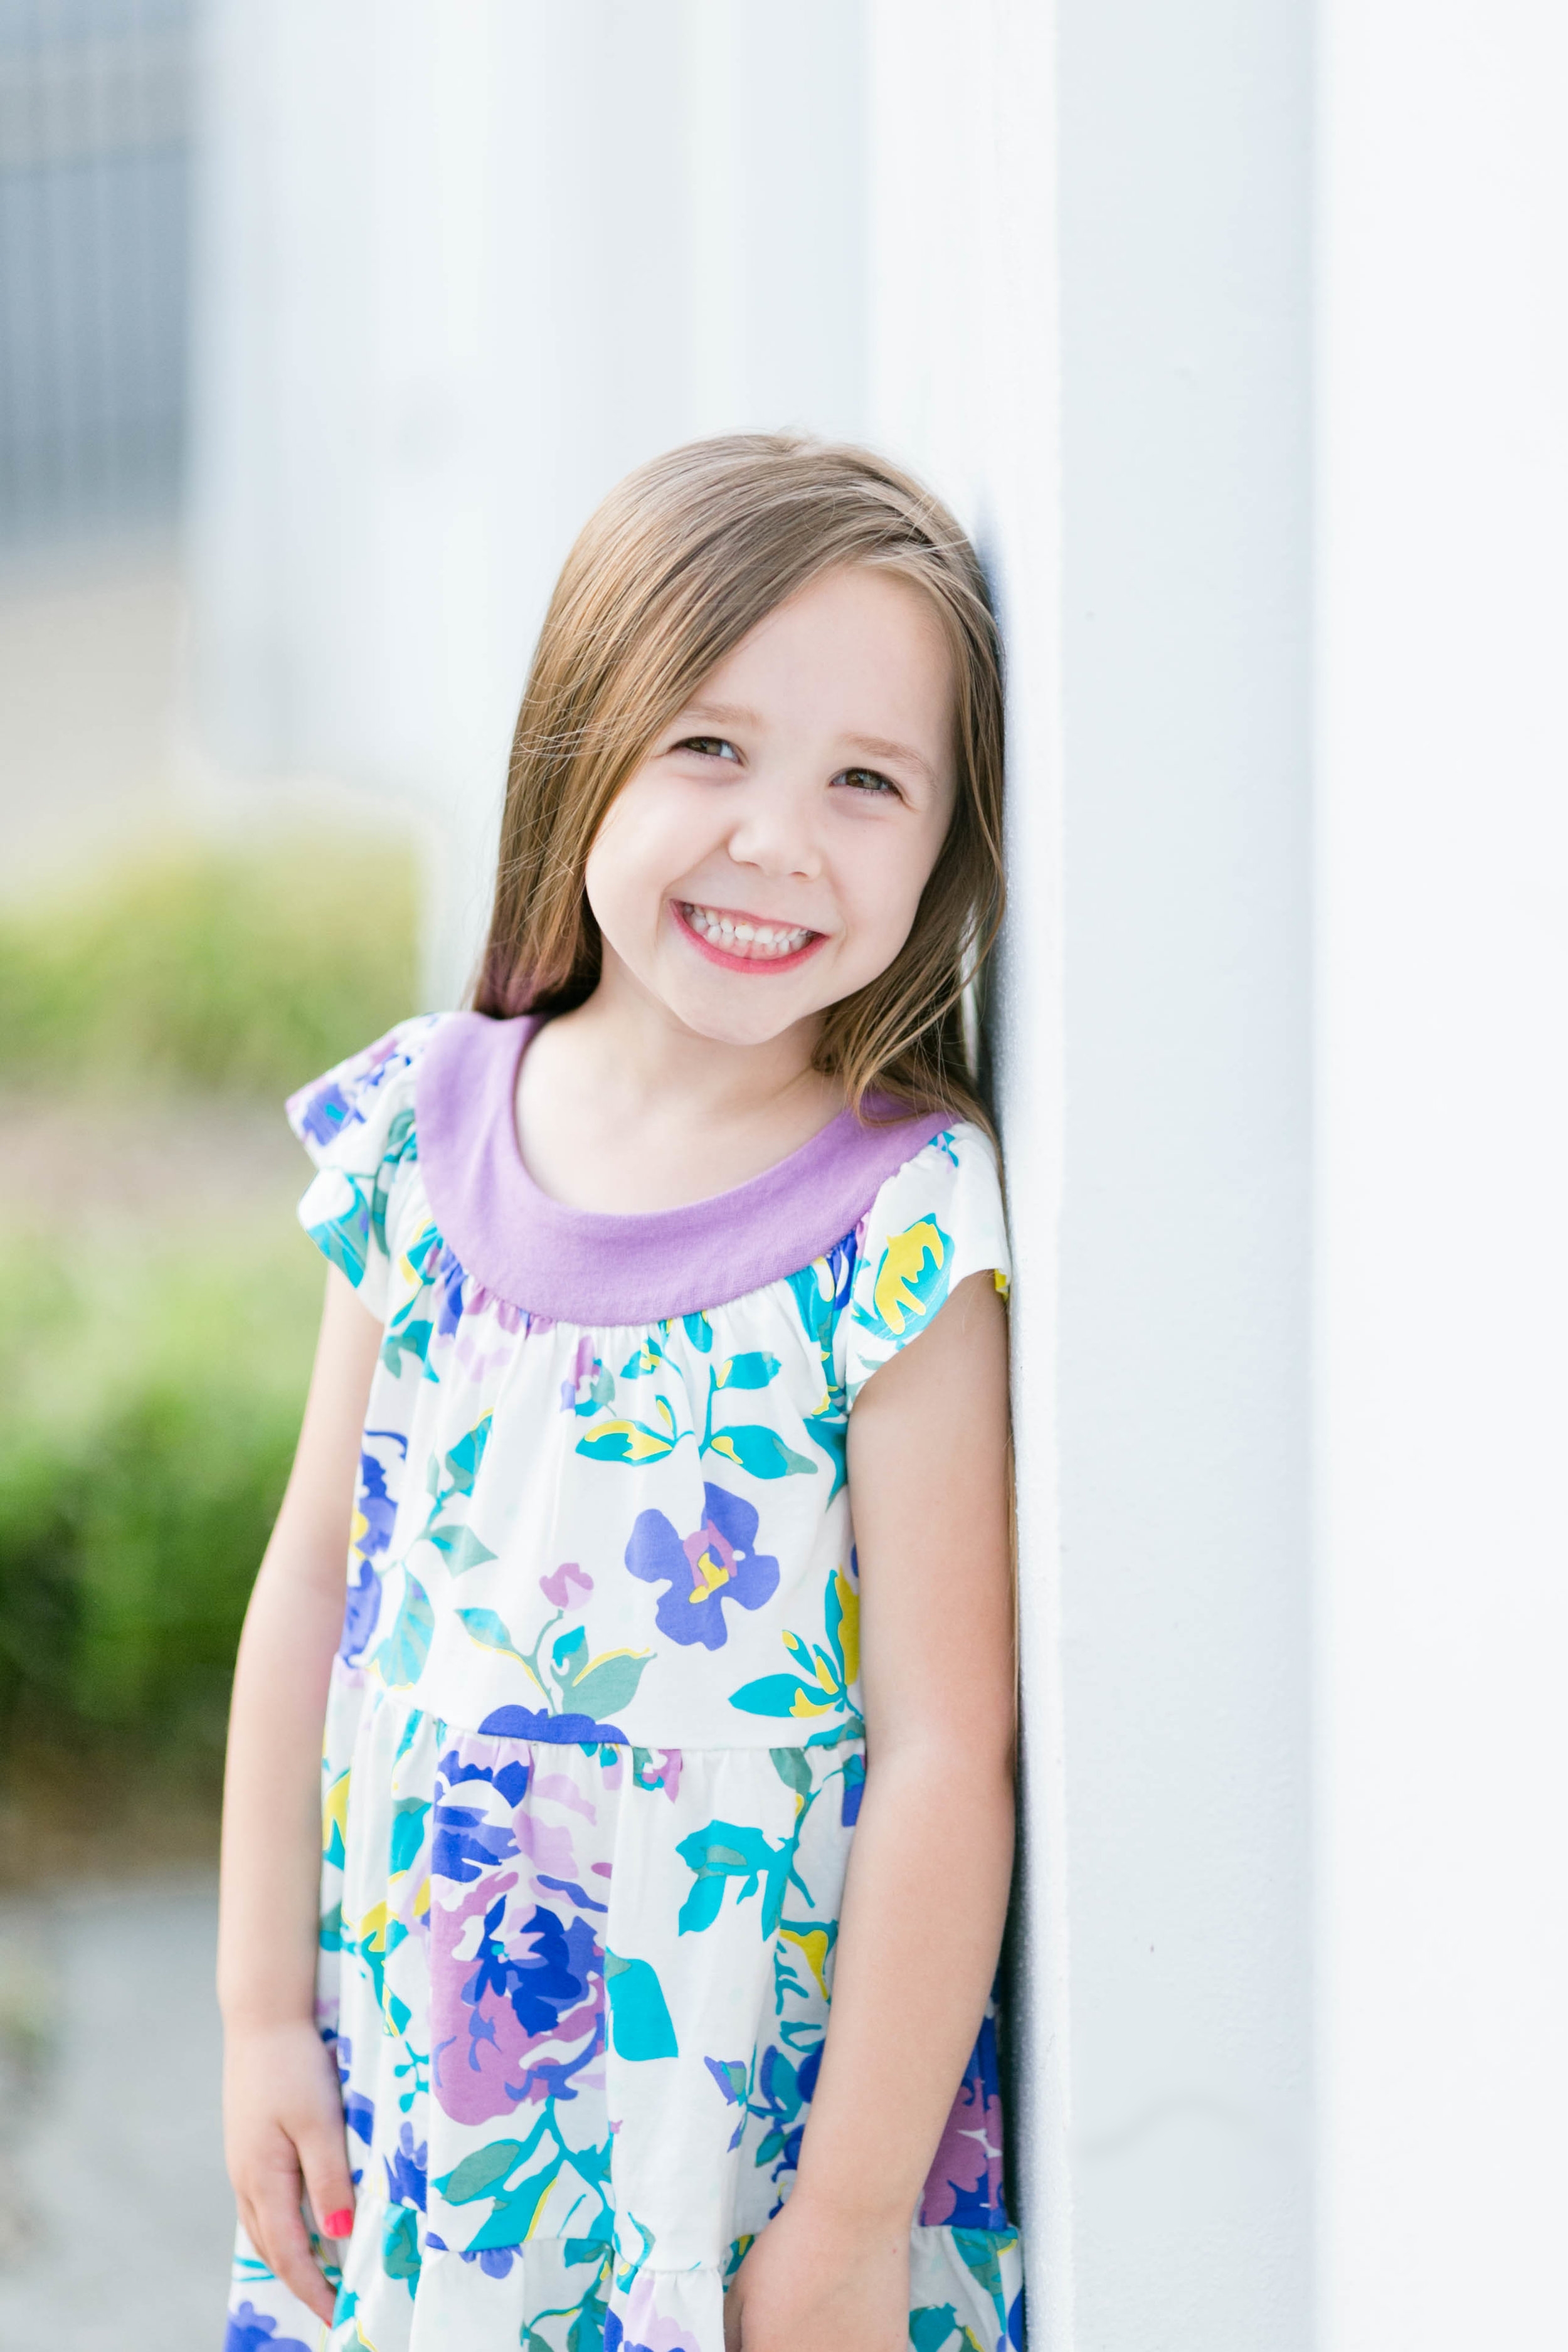 East Tennessee photography, Johnson City, Tri Cities, Jonesborough, family session, spring, child portrait, wedding photographer, anniversary photos, portraits, bright and airy photography